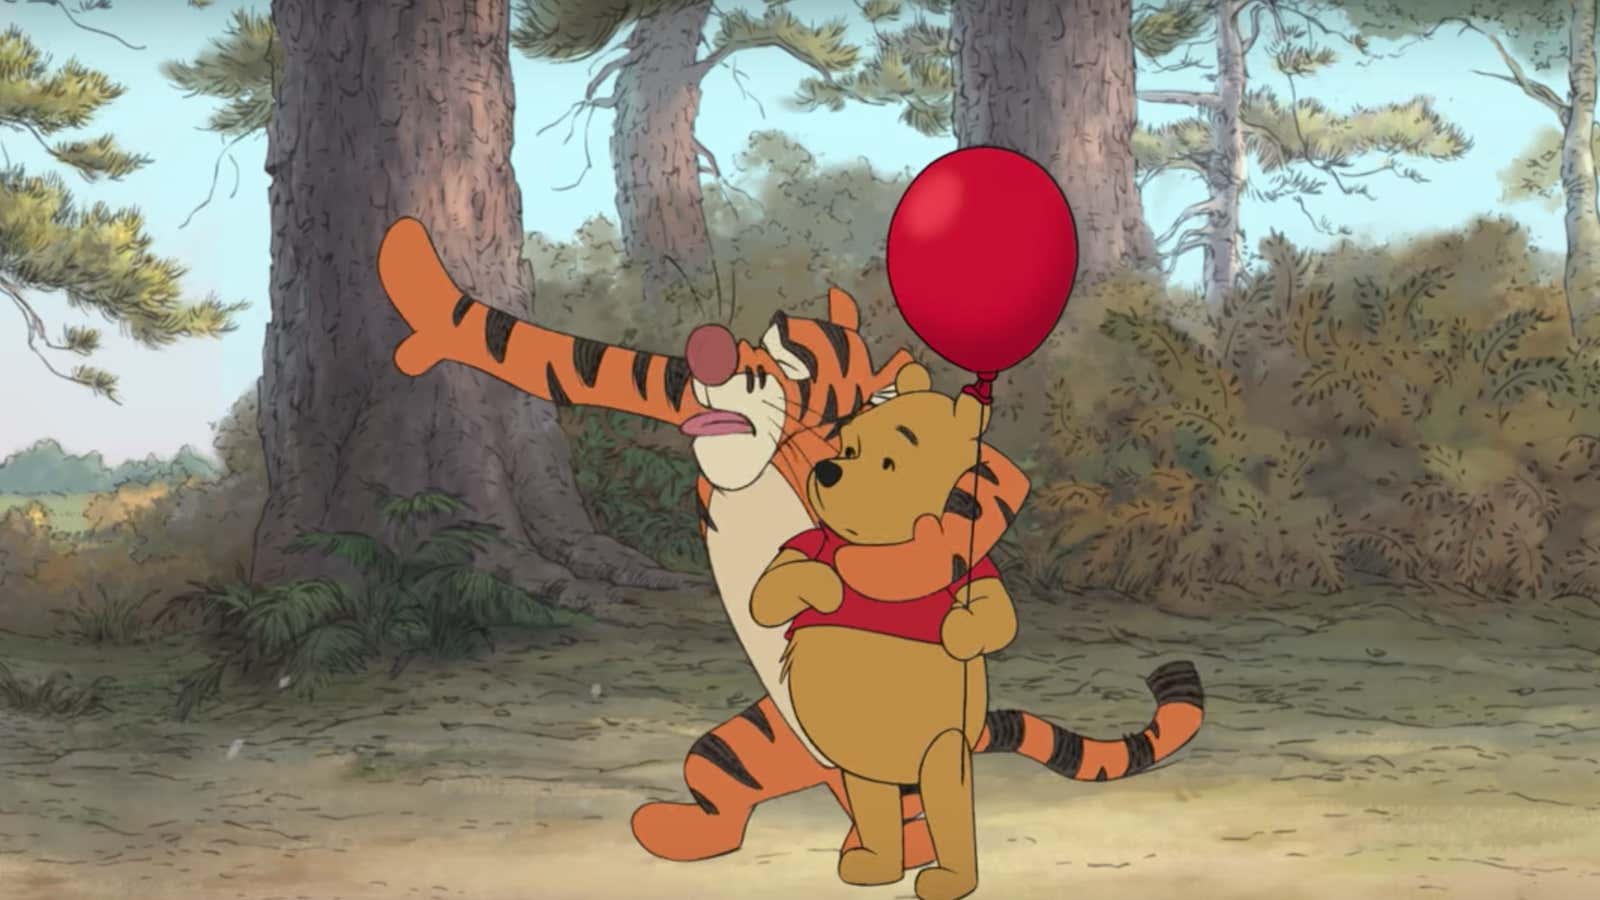 “Today, I should say, is a bad day for being Pooh.”